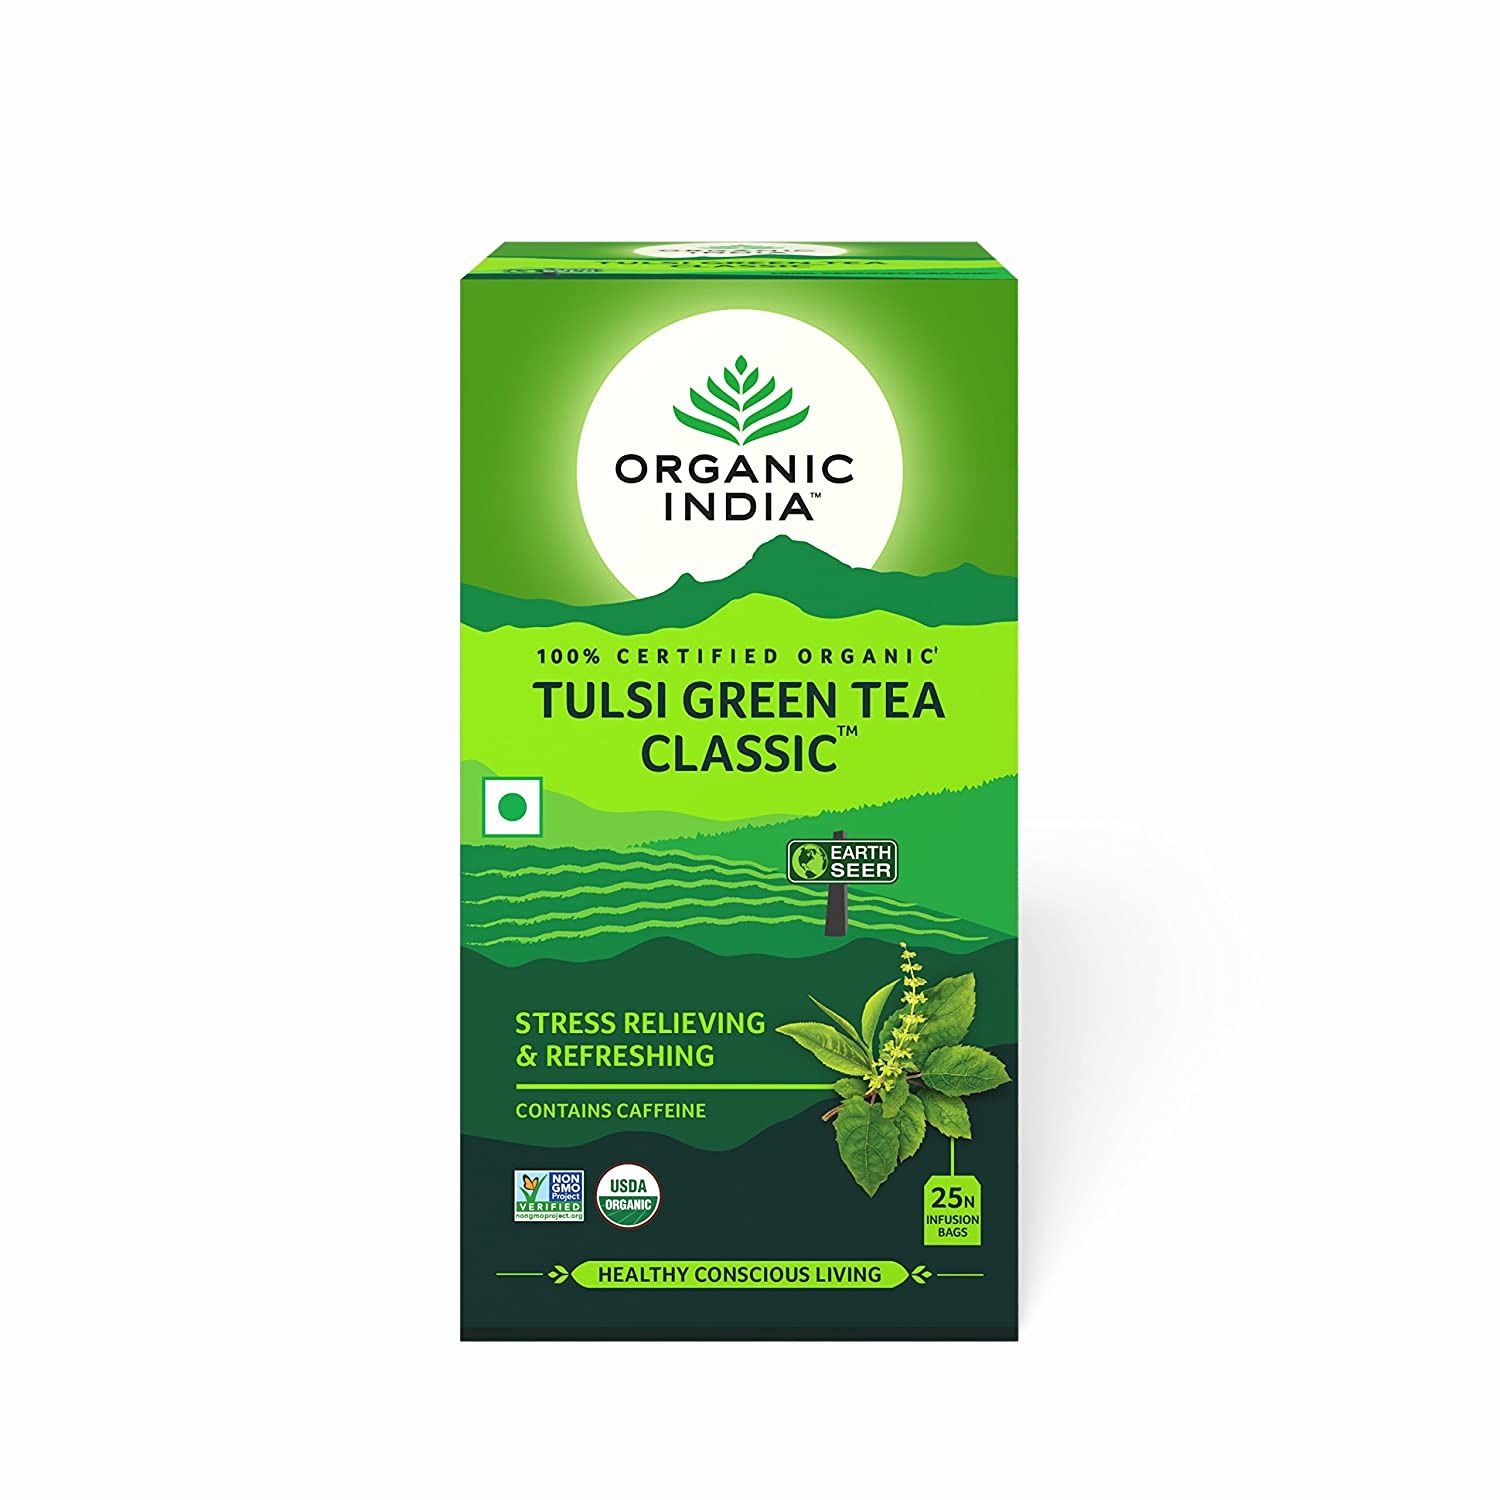 INDIAN ORGANIC Green Tea Brands In The World